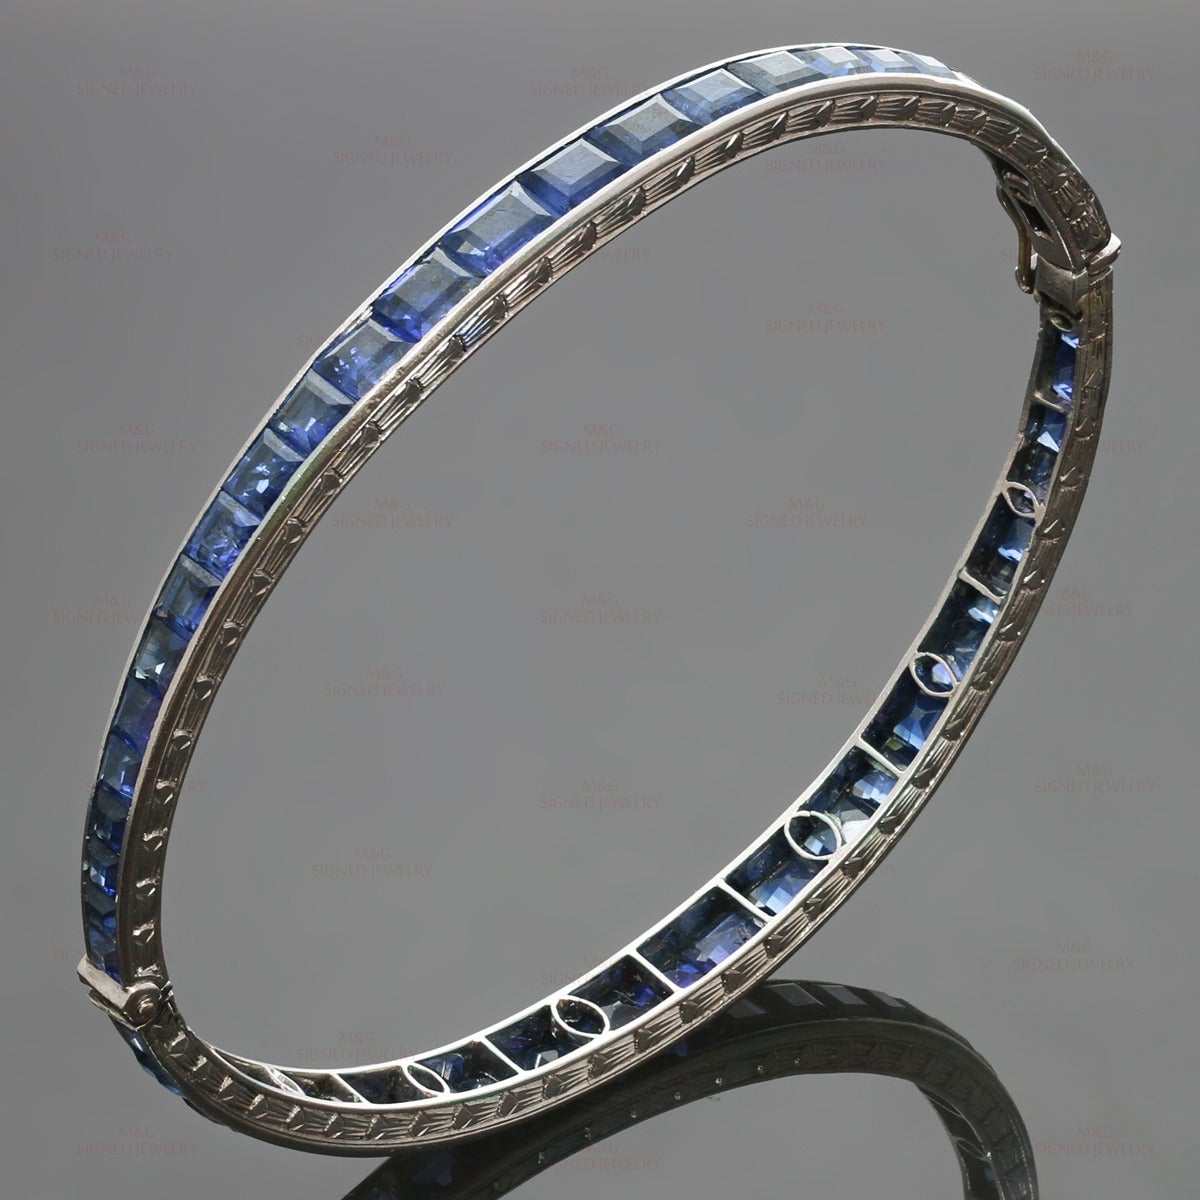 This rare and antique Van Cleef & Arpels oval bangle bracelet features a delicate hand-made filigree design crafted in platinum-iridium and set with beautifully transparent blue French-cut sapphires. Made in France circa 1930s. Measurements: 0.19